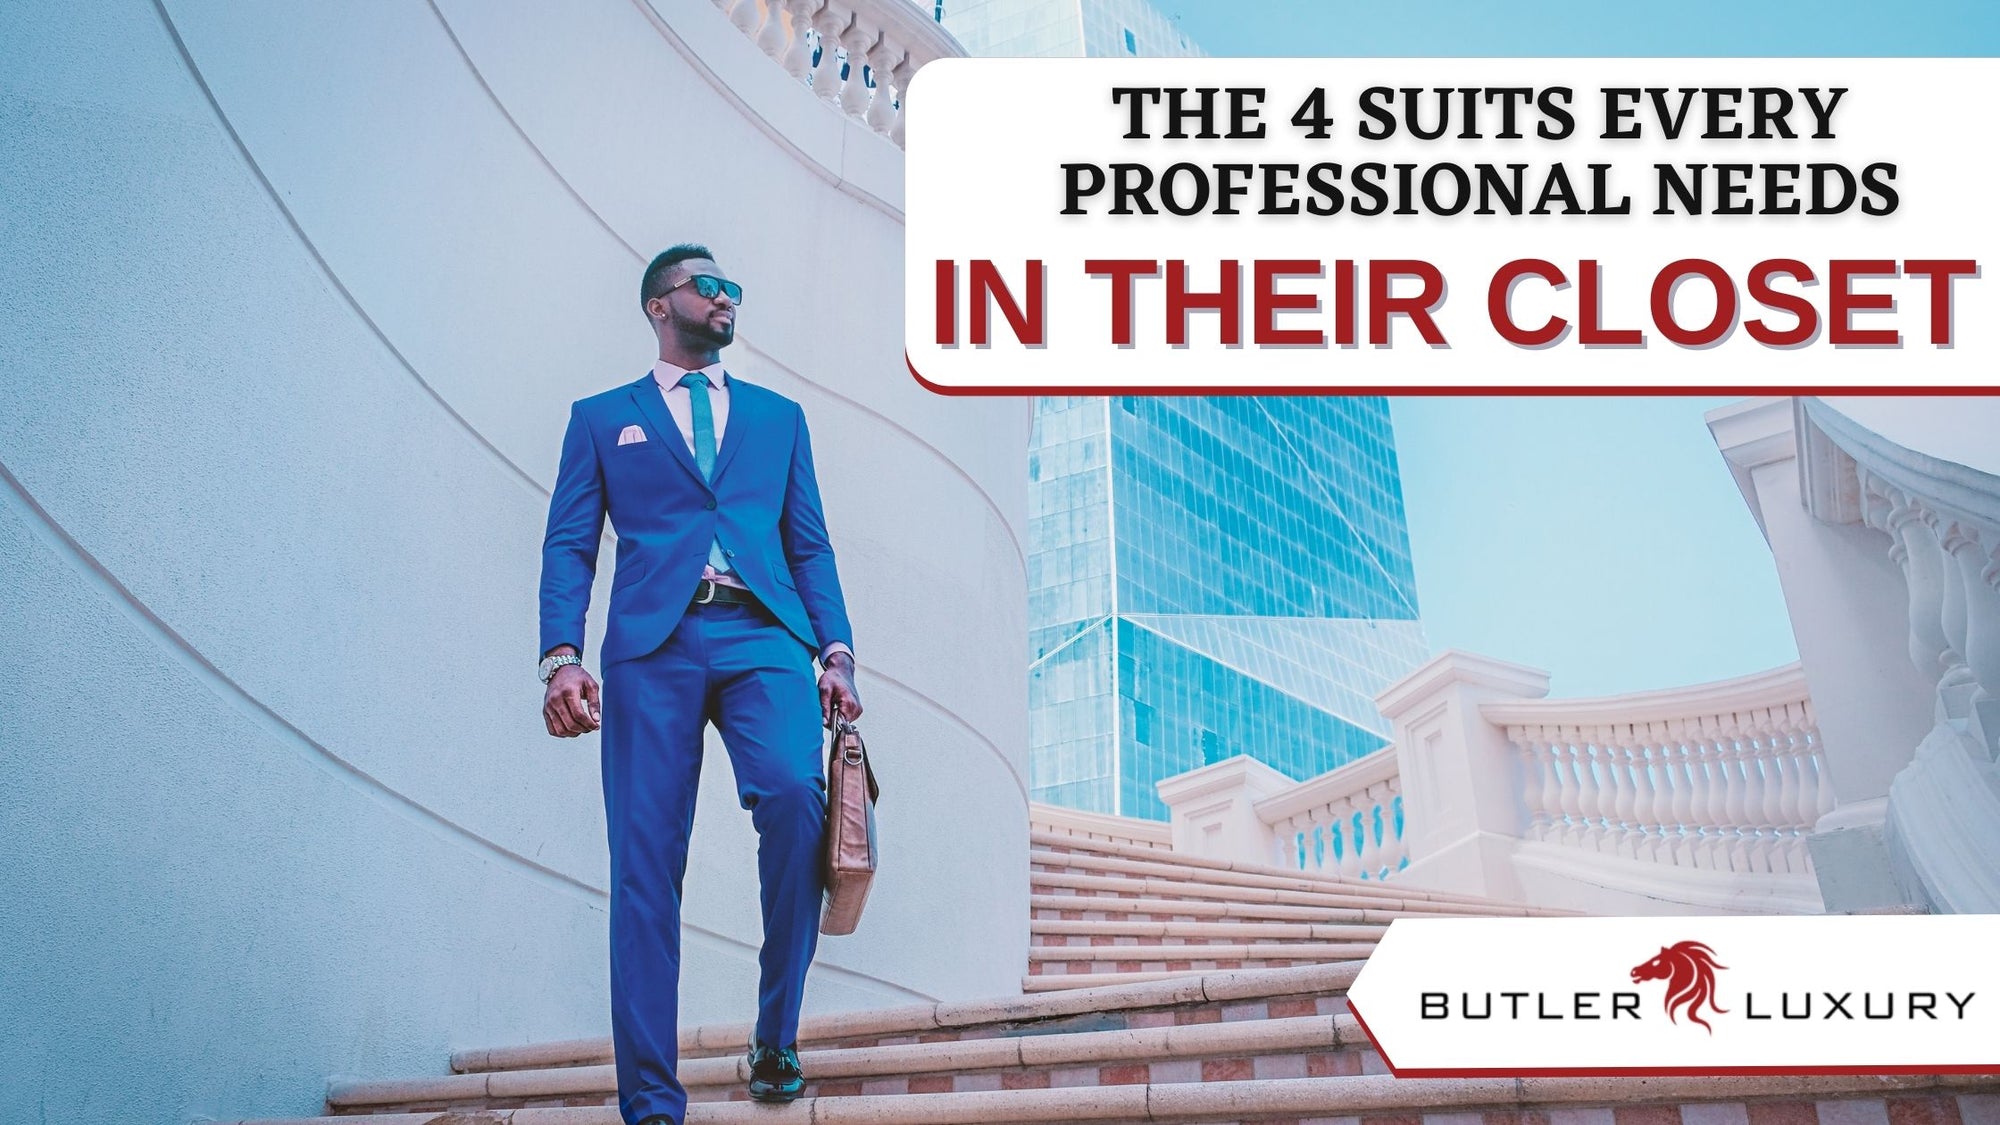 The Four Suits Every Professional Needs in Their Closet